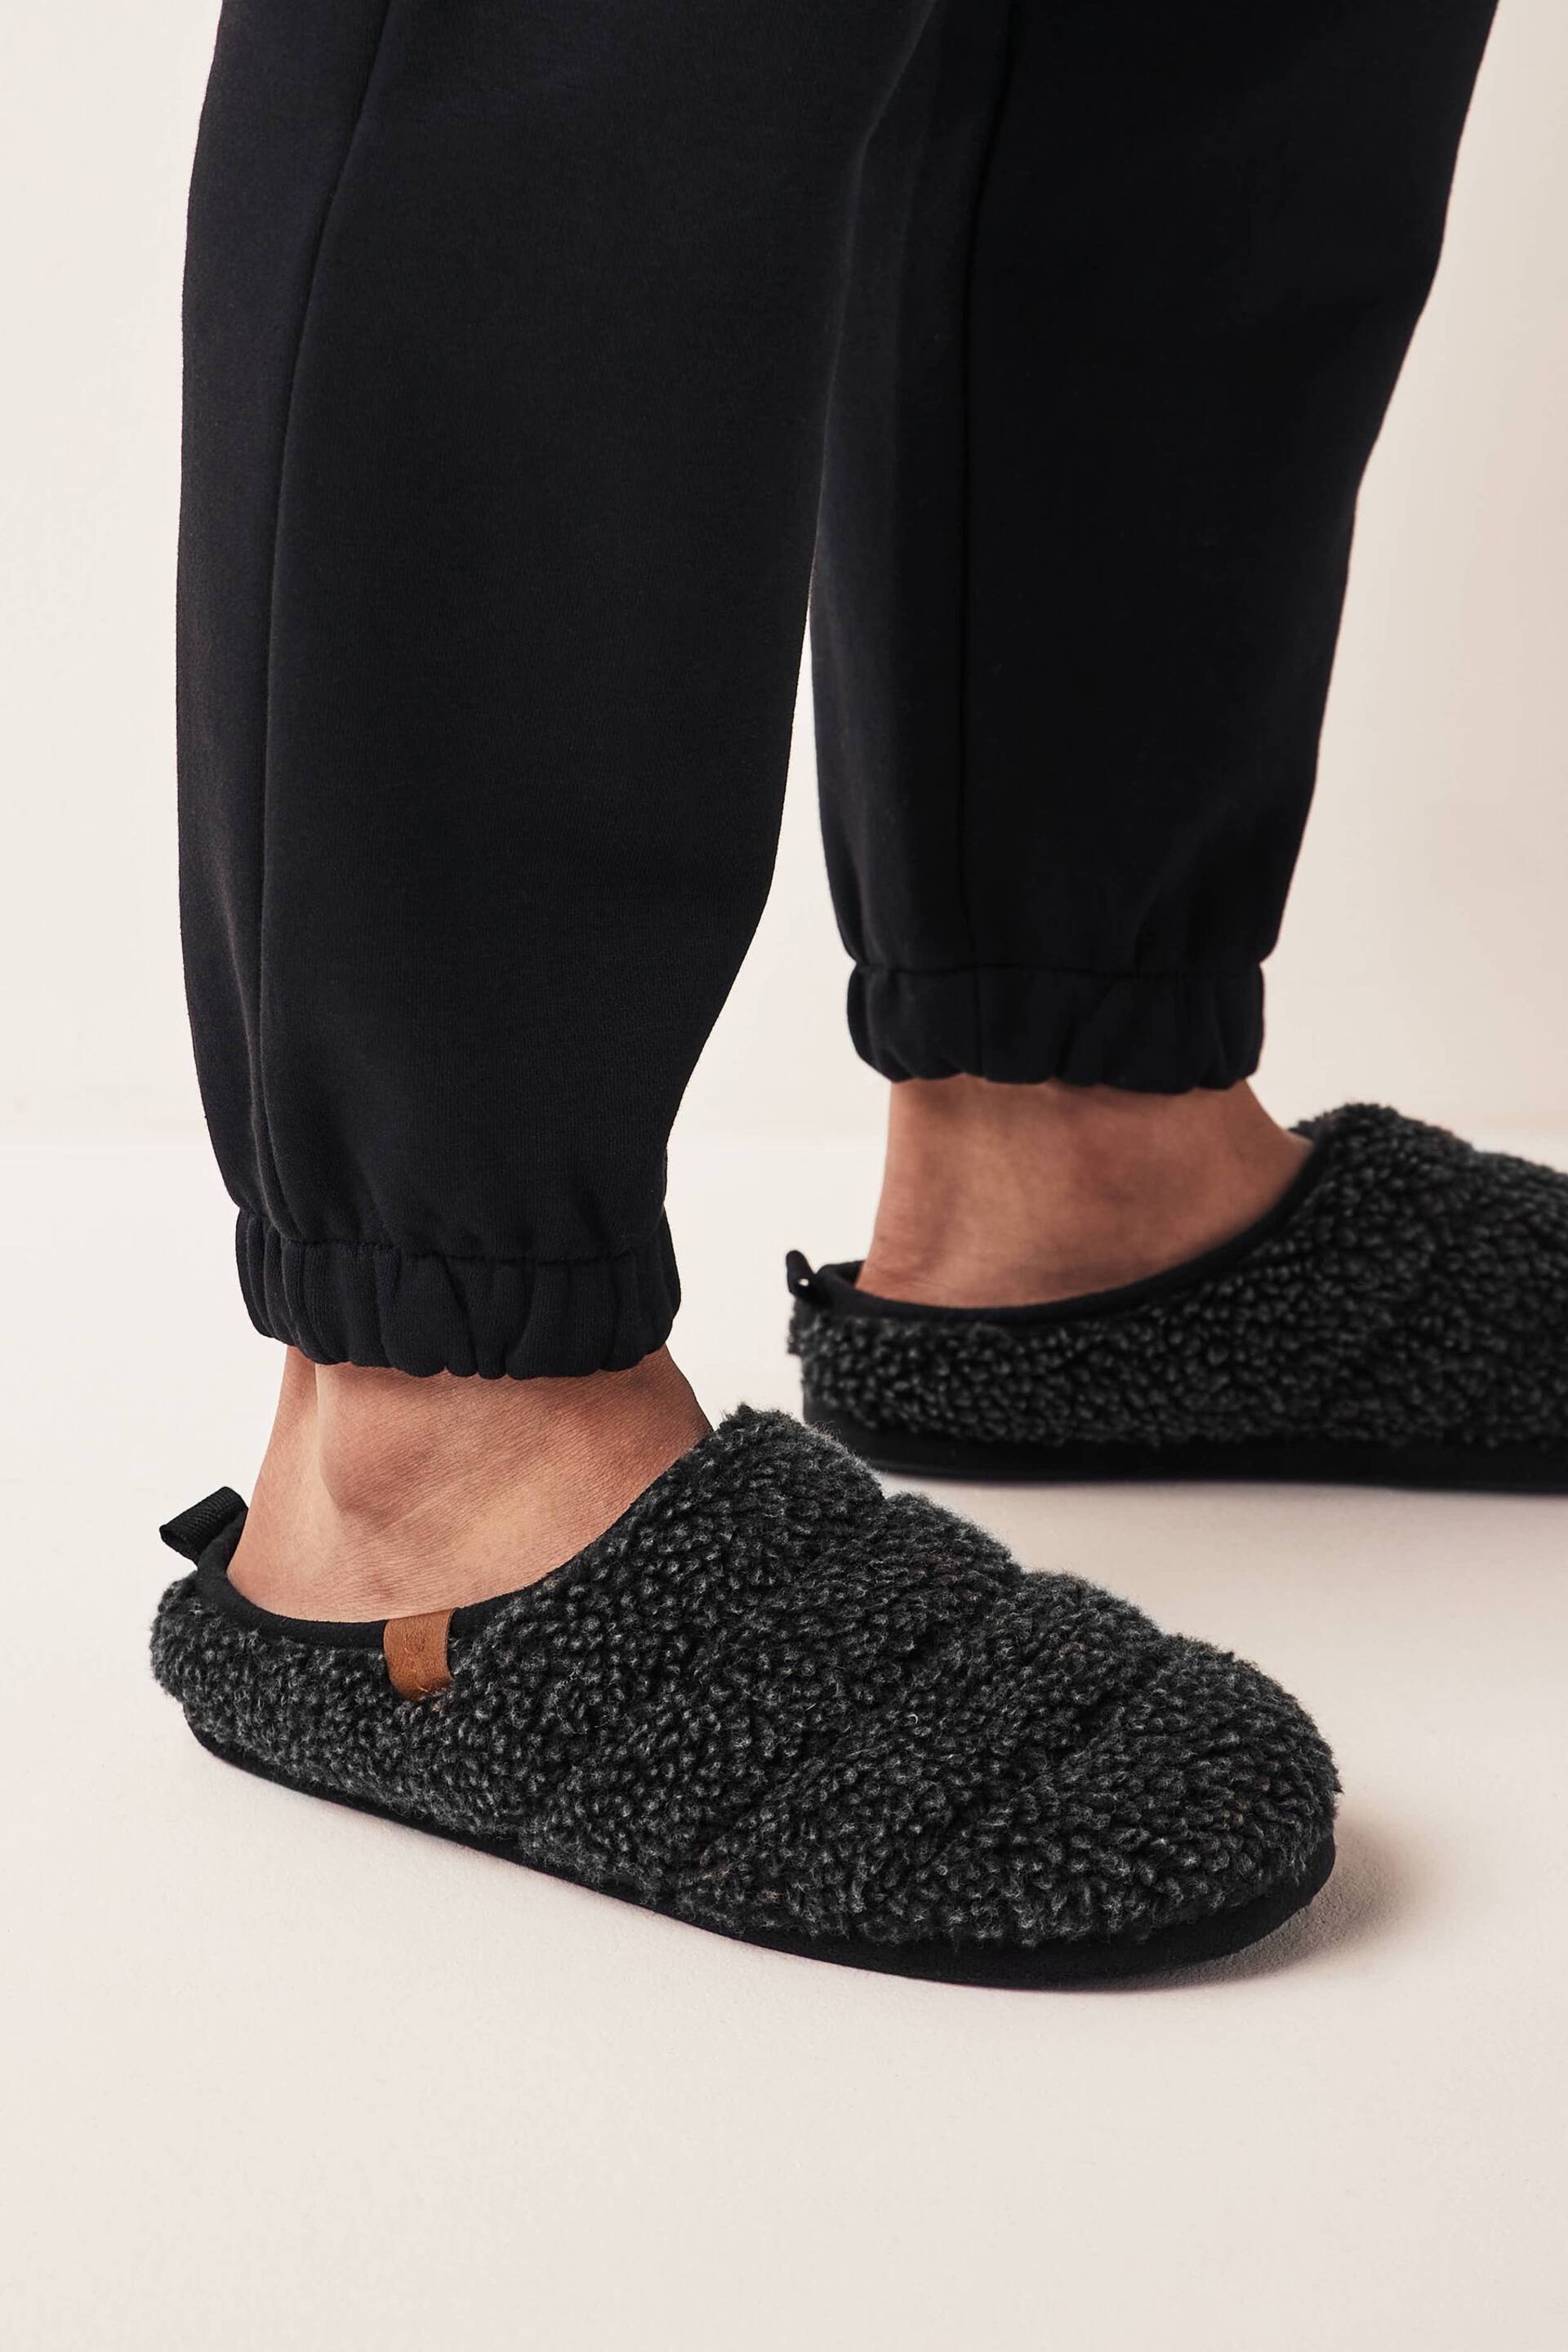 Charcoal Grey Padded Borg Mule Slippers - Image 7 of 7